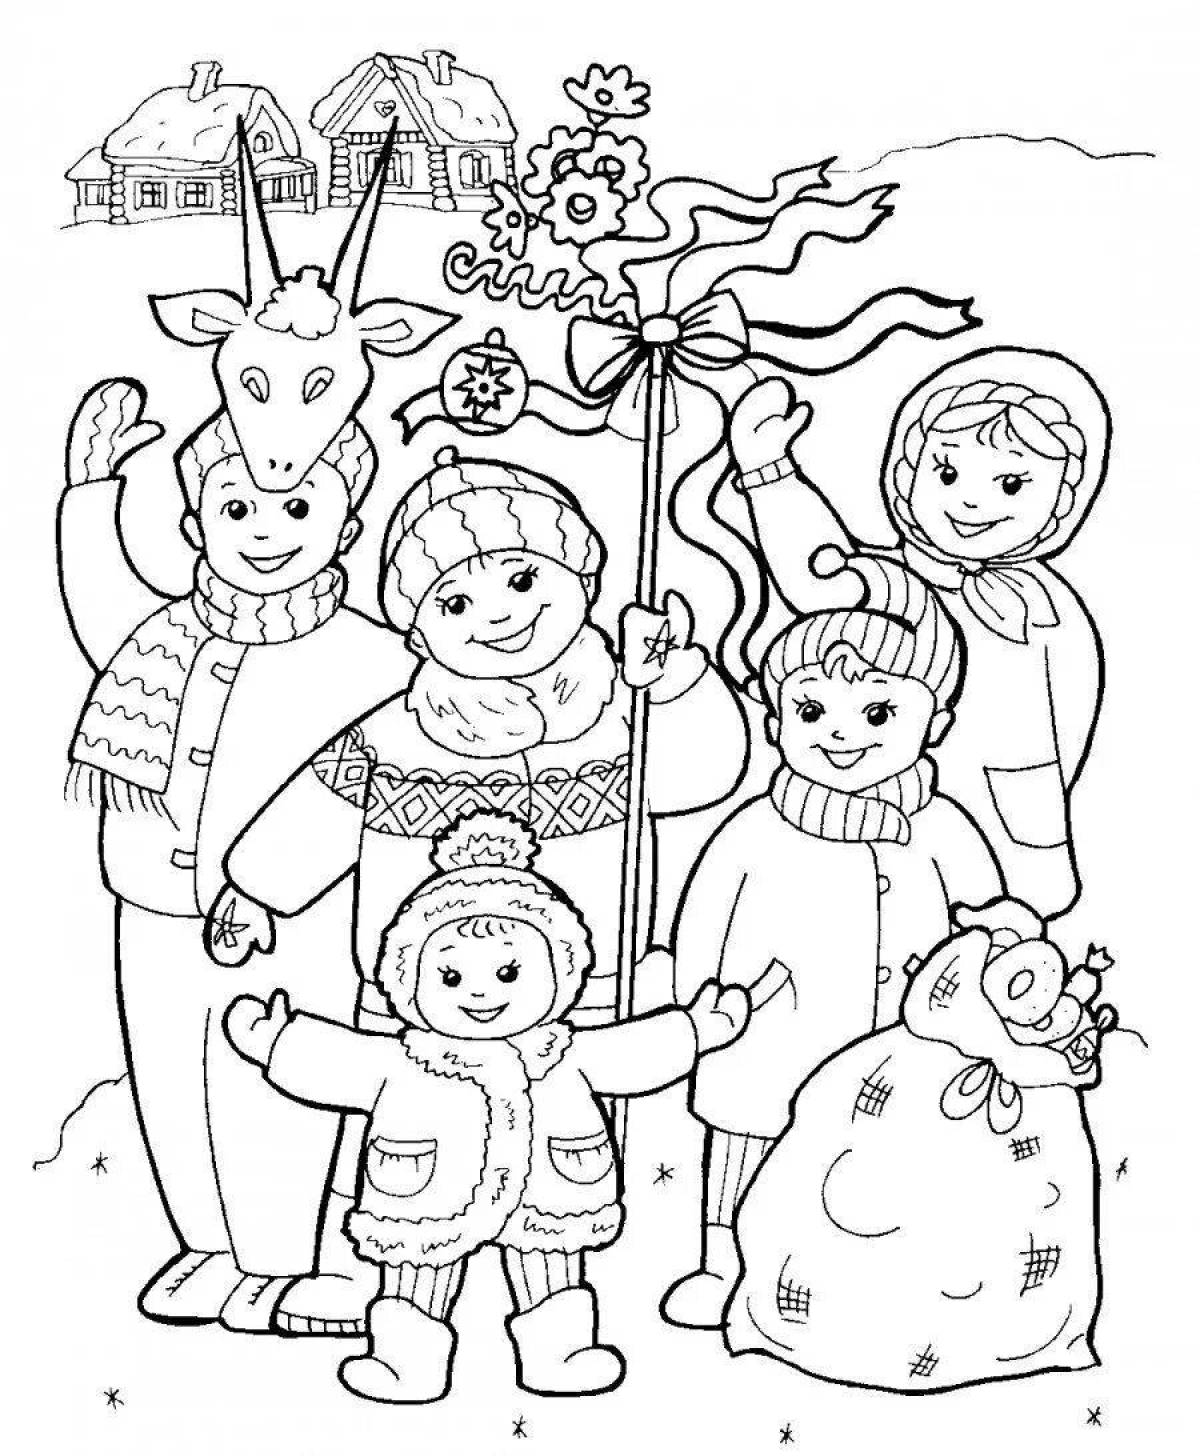 Colorful Christmas coloring book